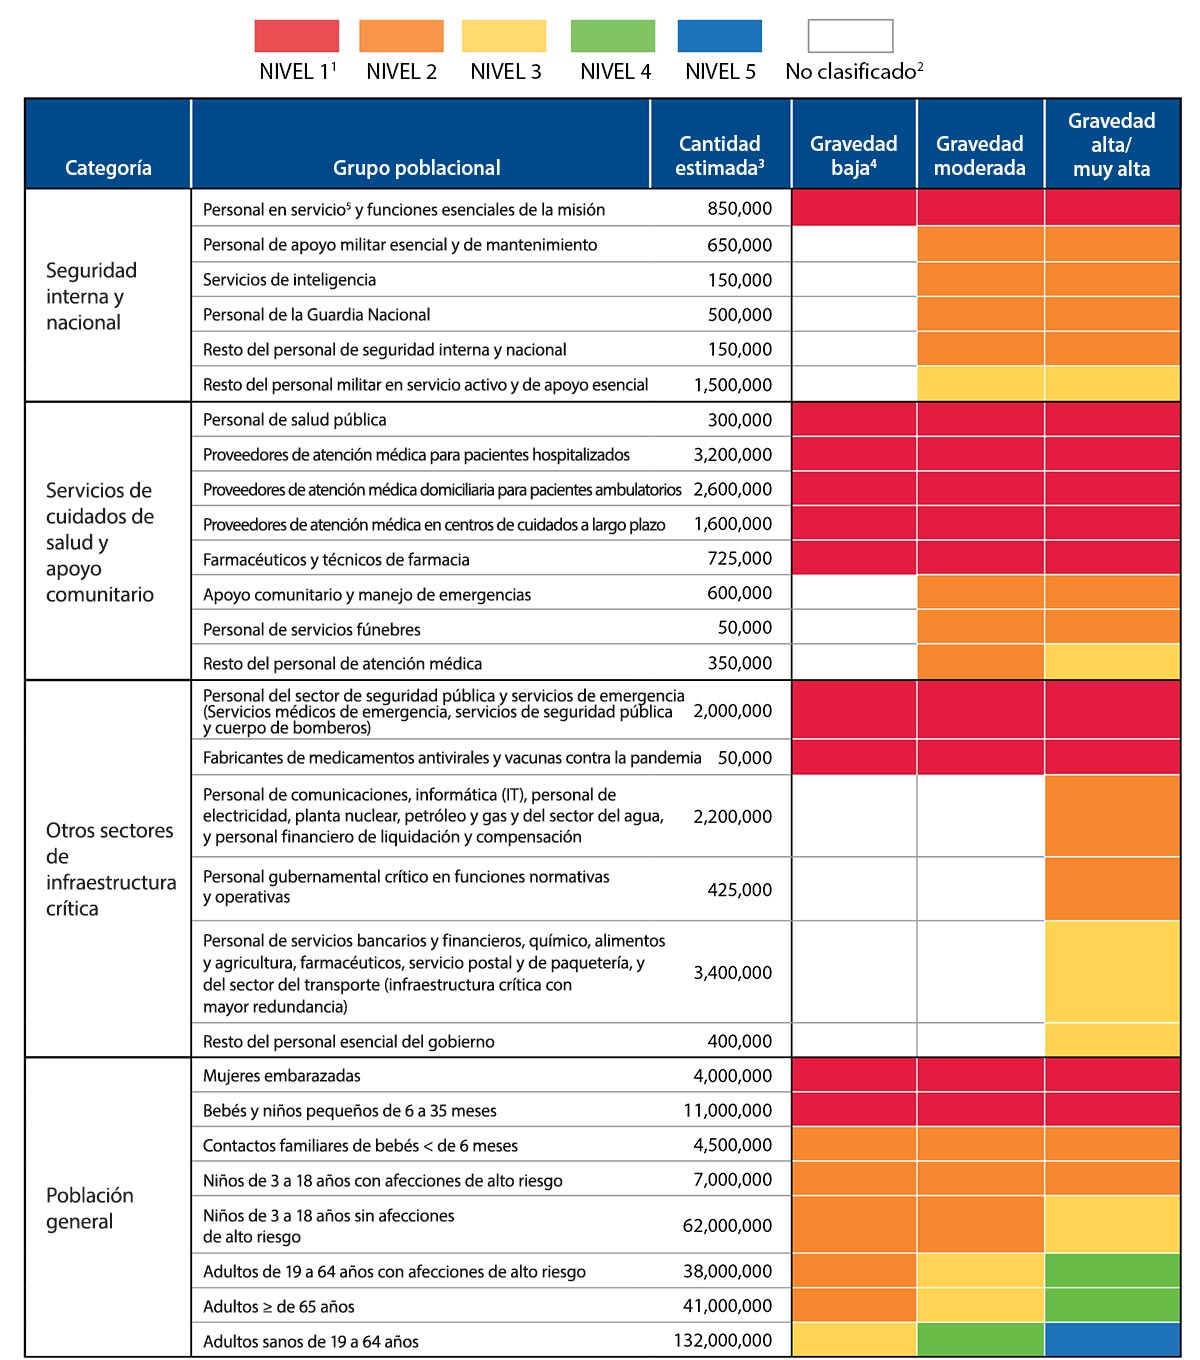 Pandemic influenza vaccination planning table